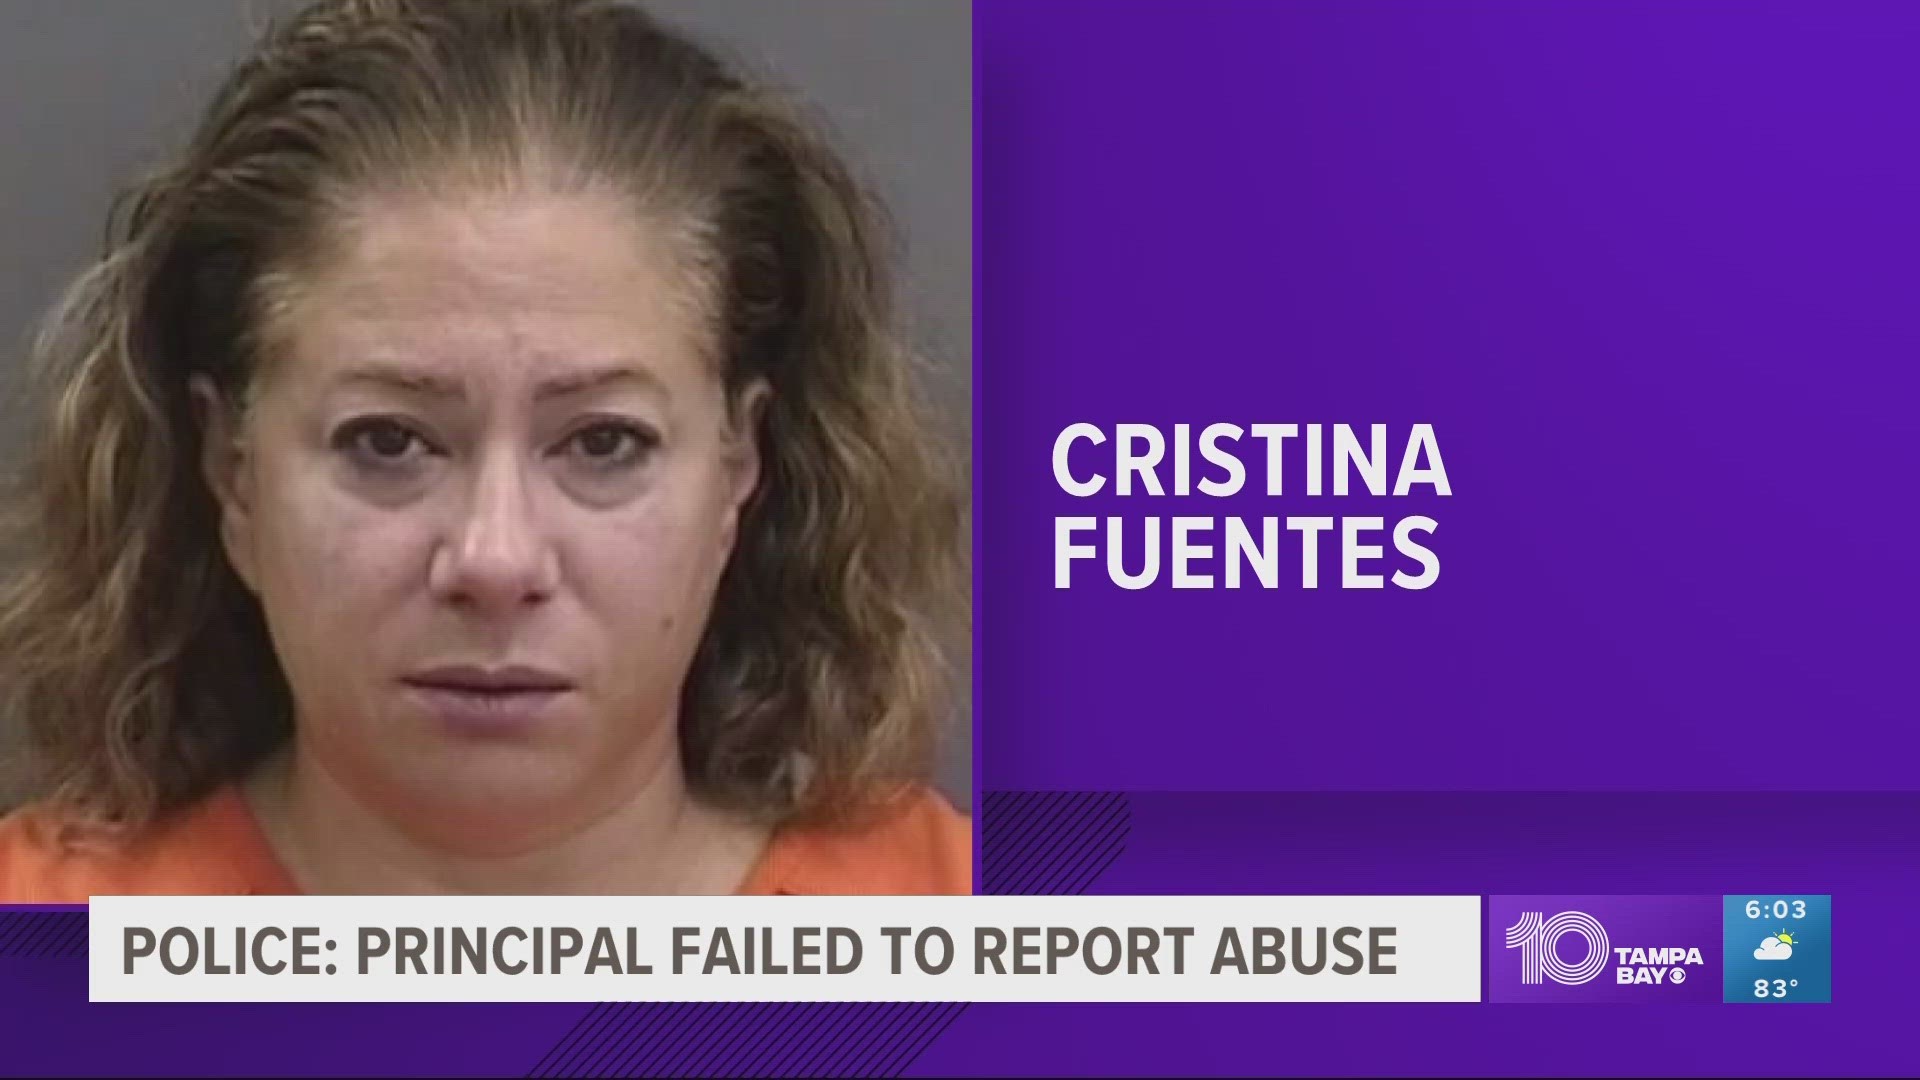 After detectives began their investigation in April, the principal of Channelside Academy of Math and Science, 49-year-old Cristina Fuentes, surrendered to police.